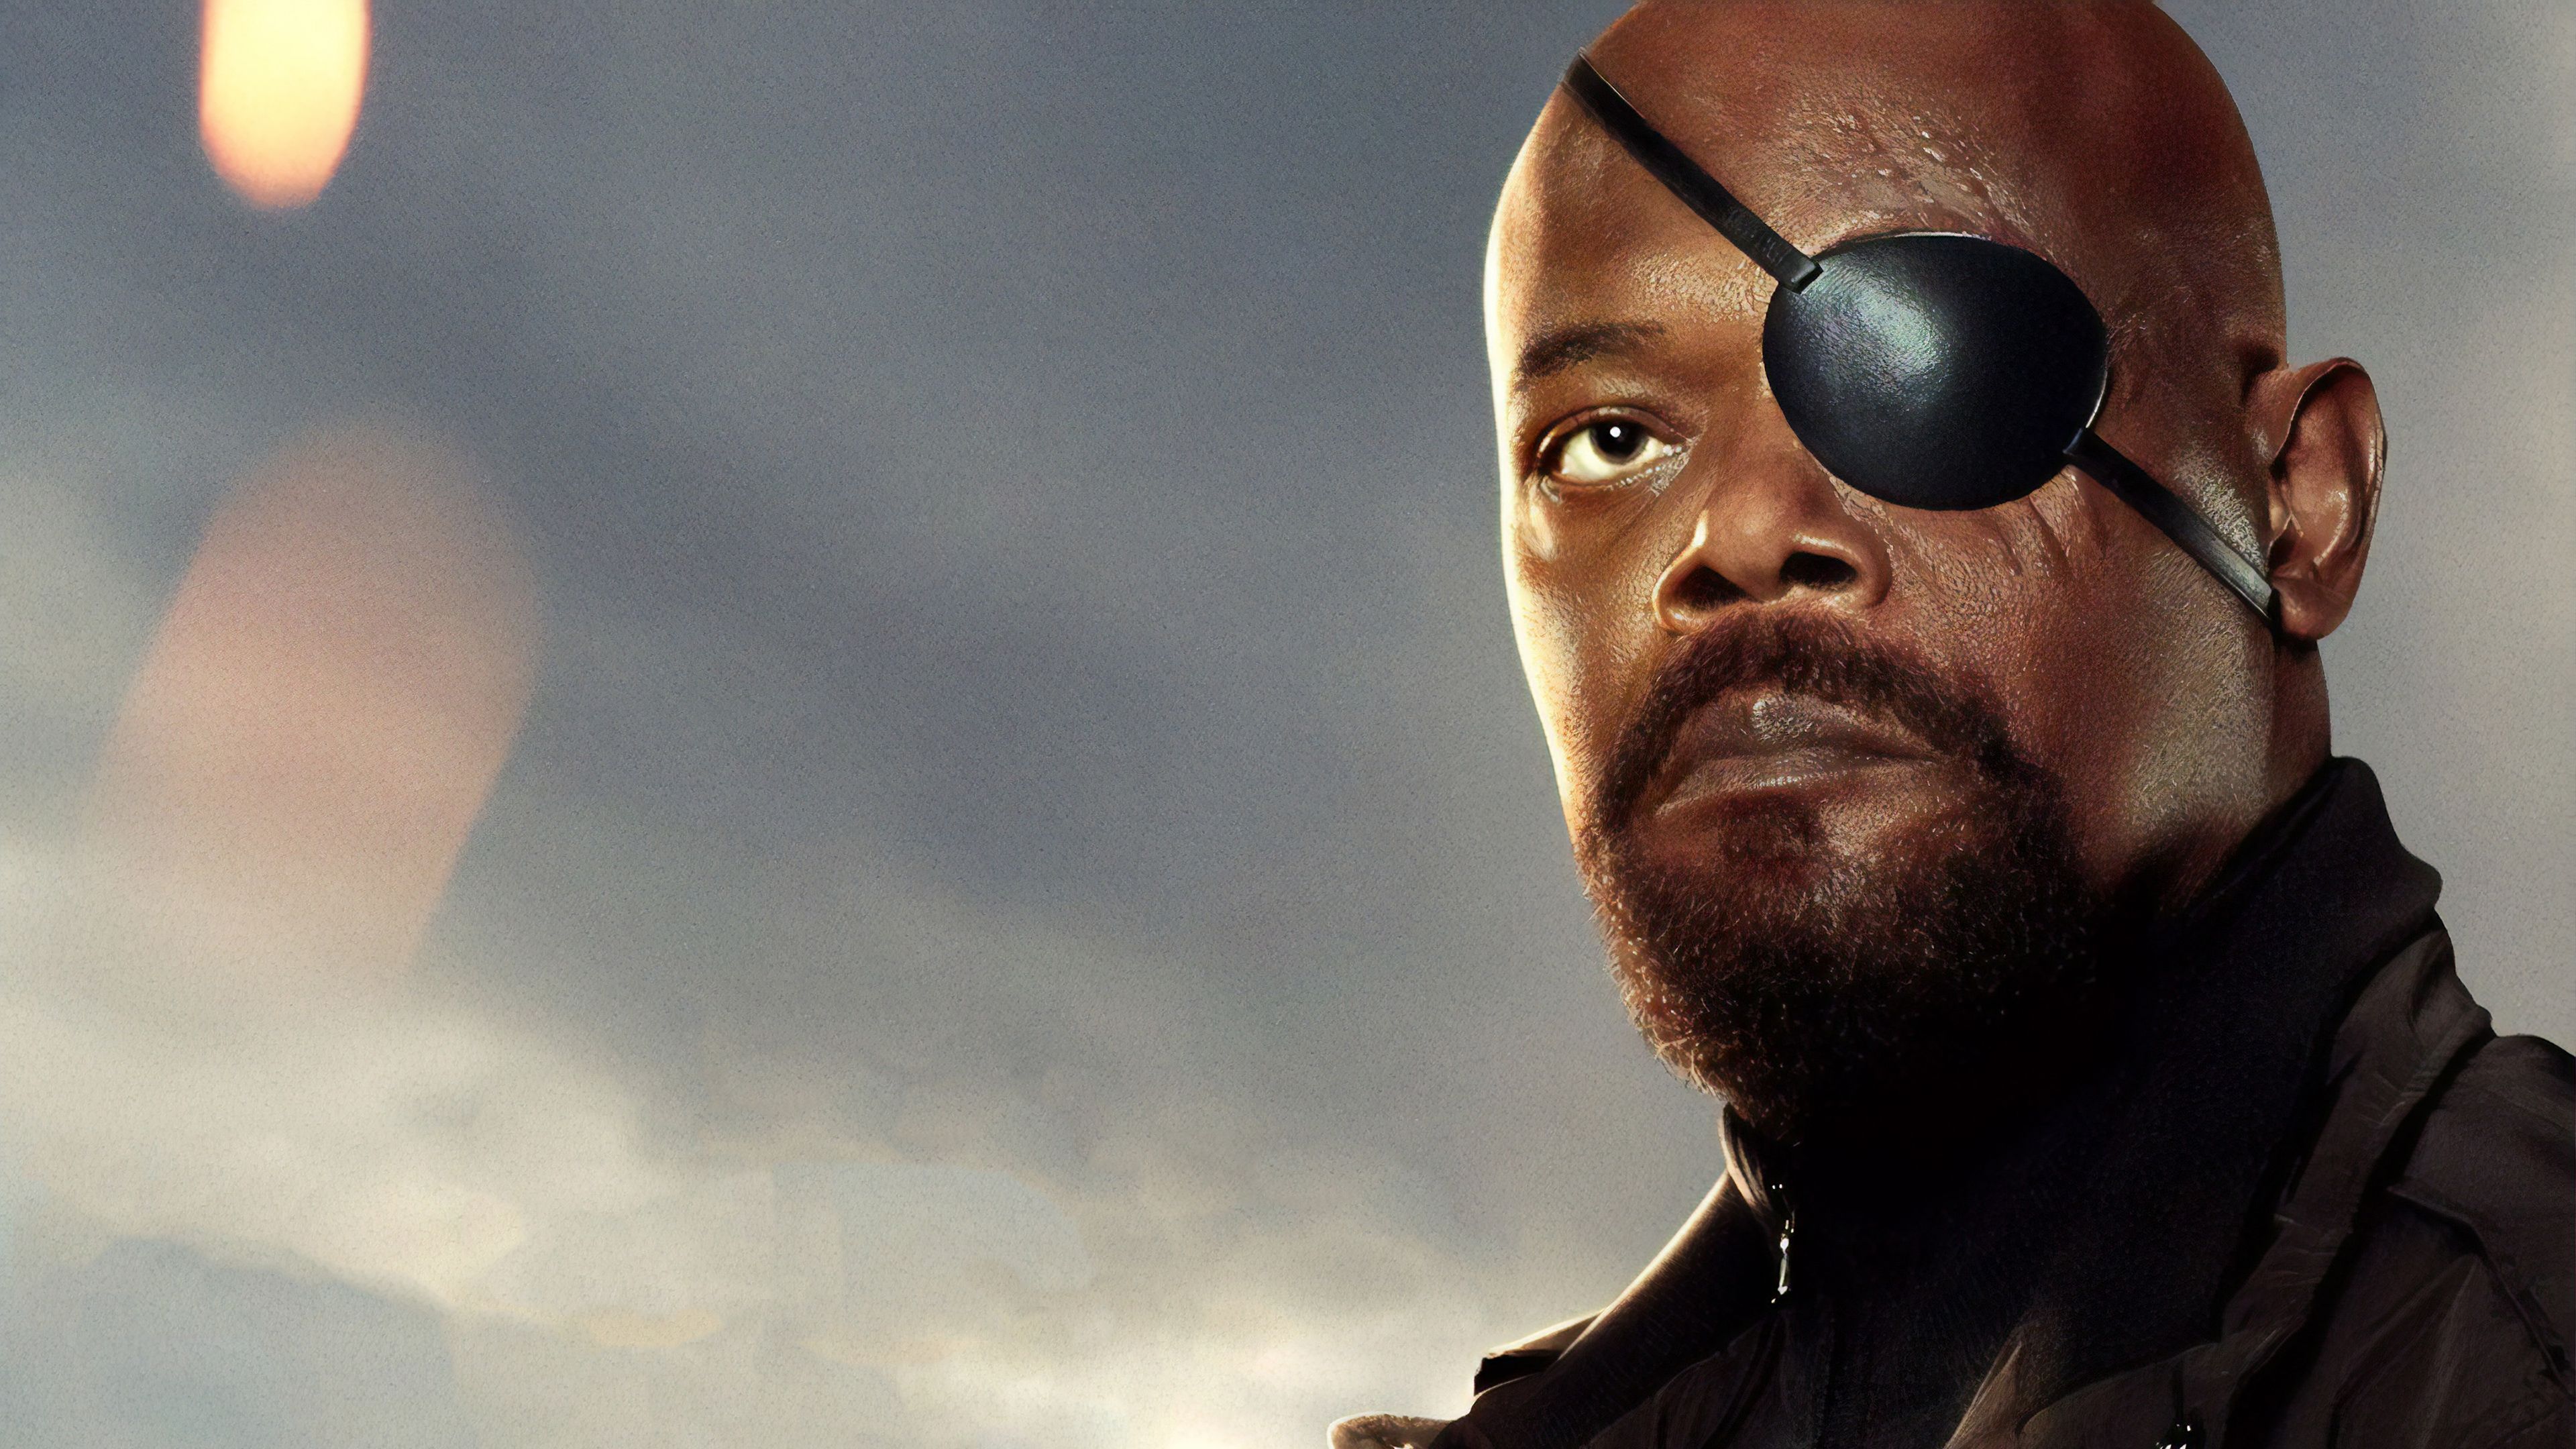 Samuel L Jackson As Nick Fury In Spider Man Far From Home Poster, HD Movies, 4k Wallpaper, Image, Background, Photo and Picture